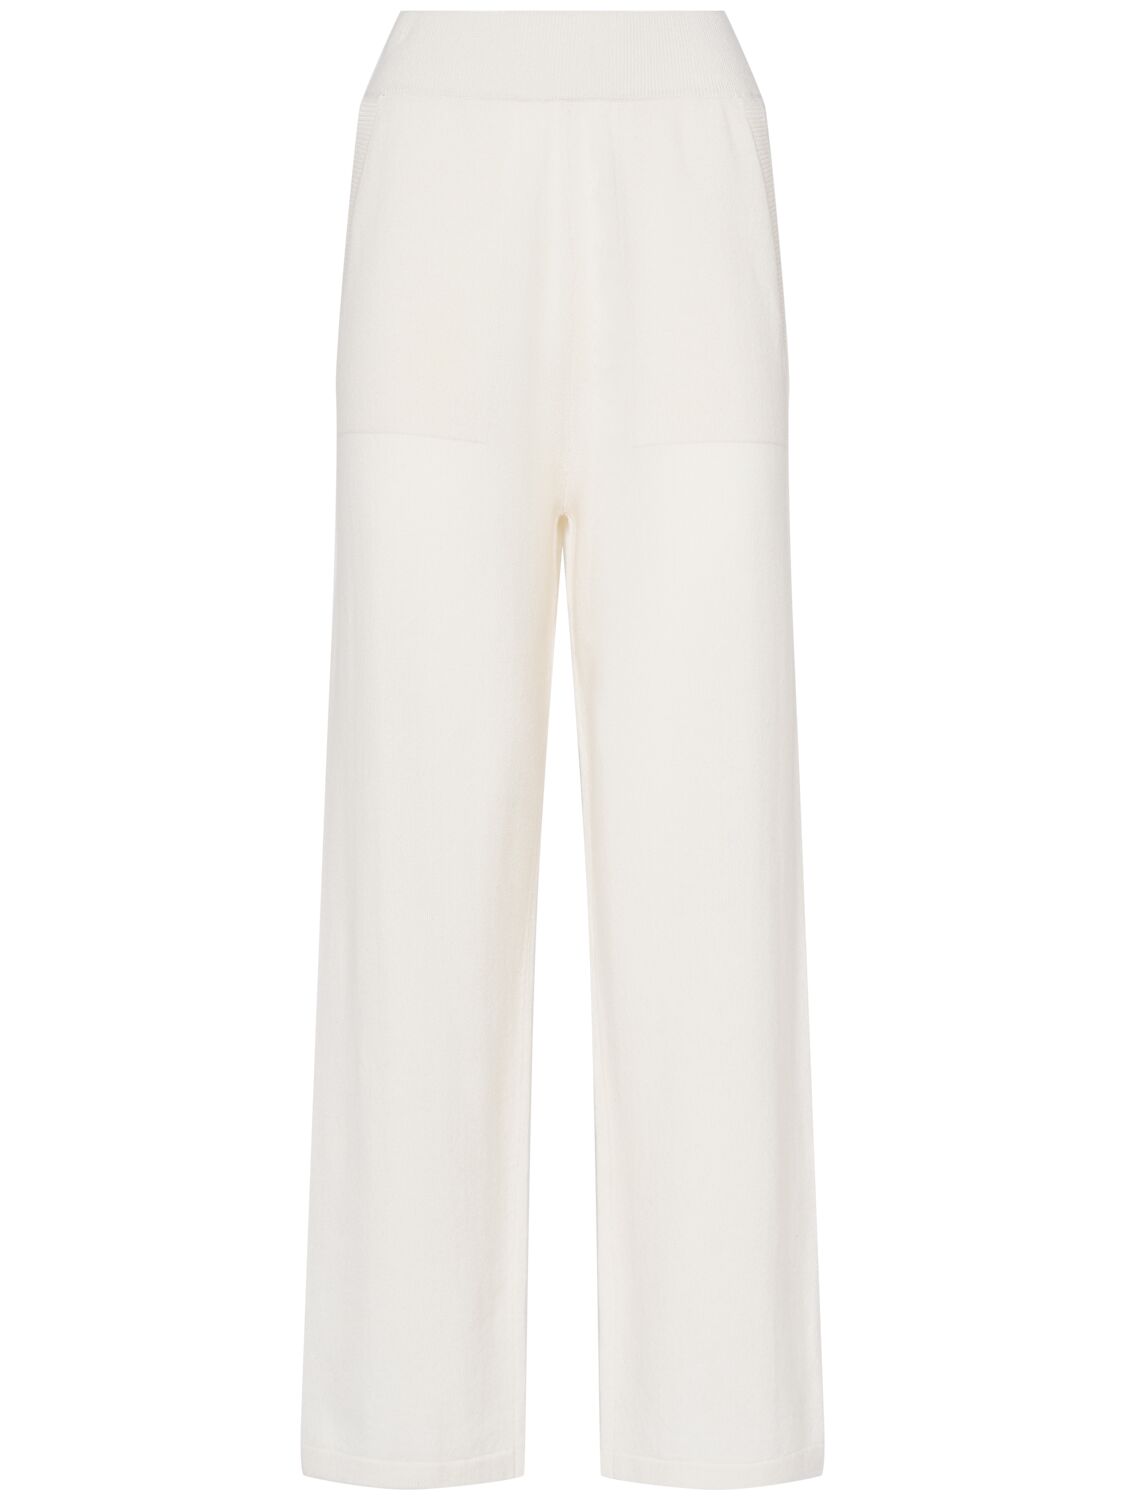 Max Mara Ghiro Wool & Cashmere Knitted Trousers In White